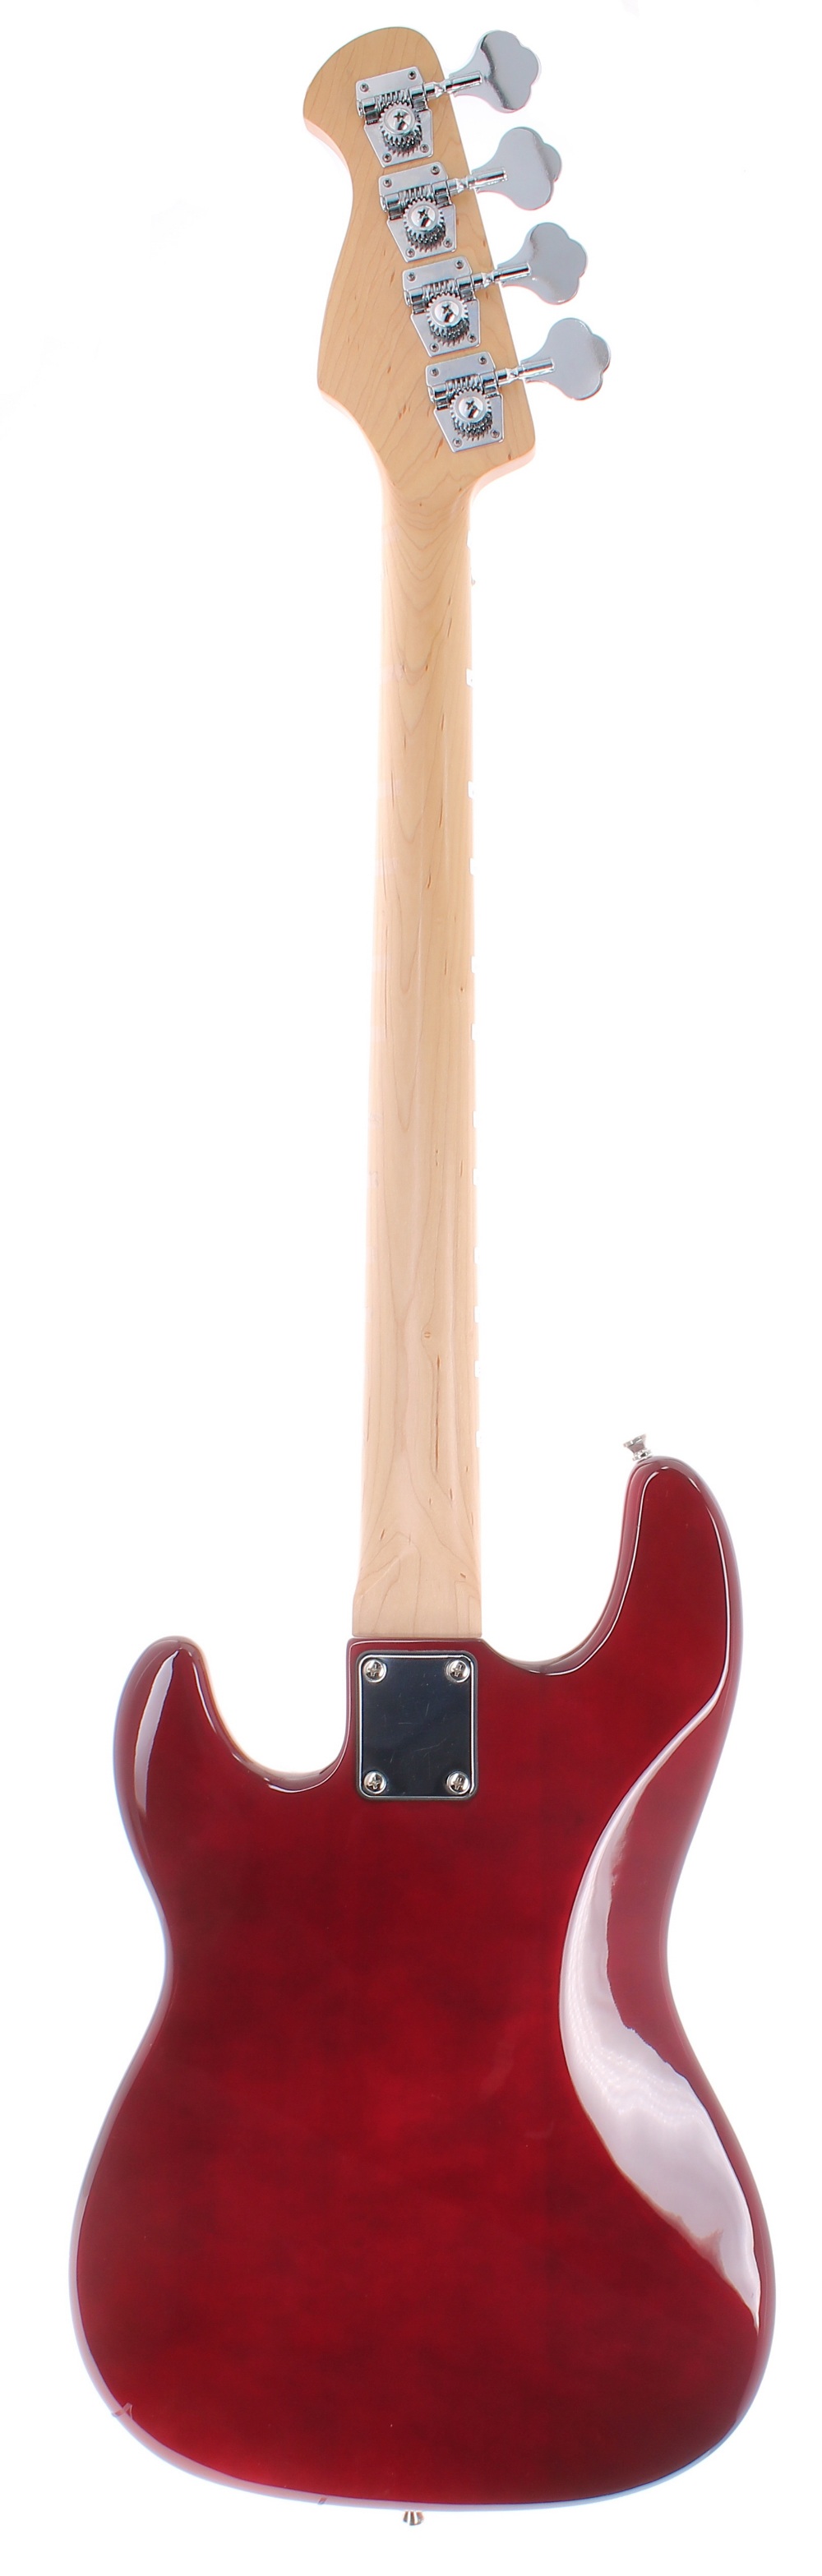 Harley Benton Deluxe Series bass guitar; Finish: red; Fretboard: rosewood, notation guide stickers - Image 2 of 2